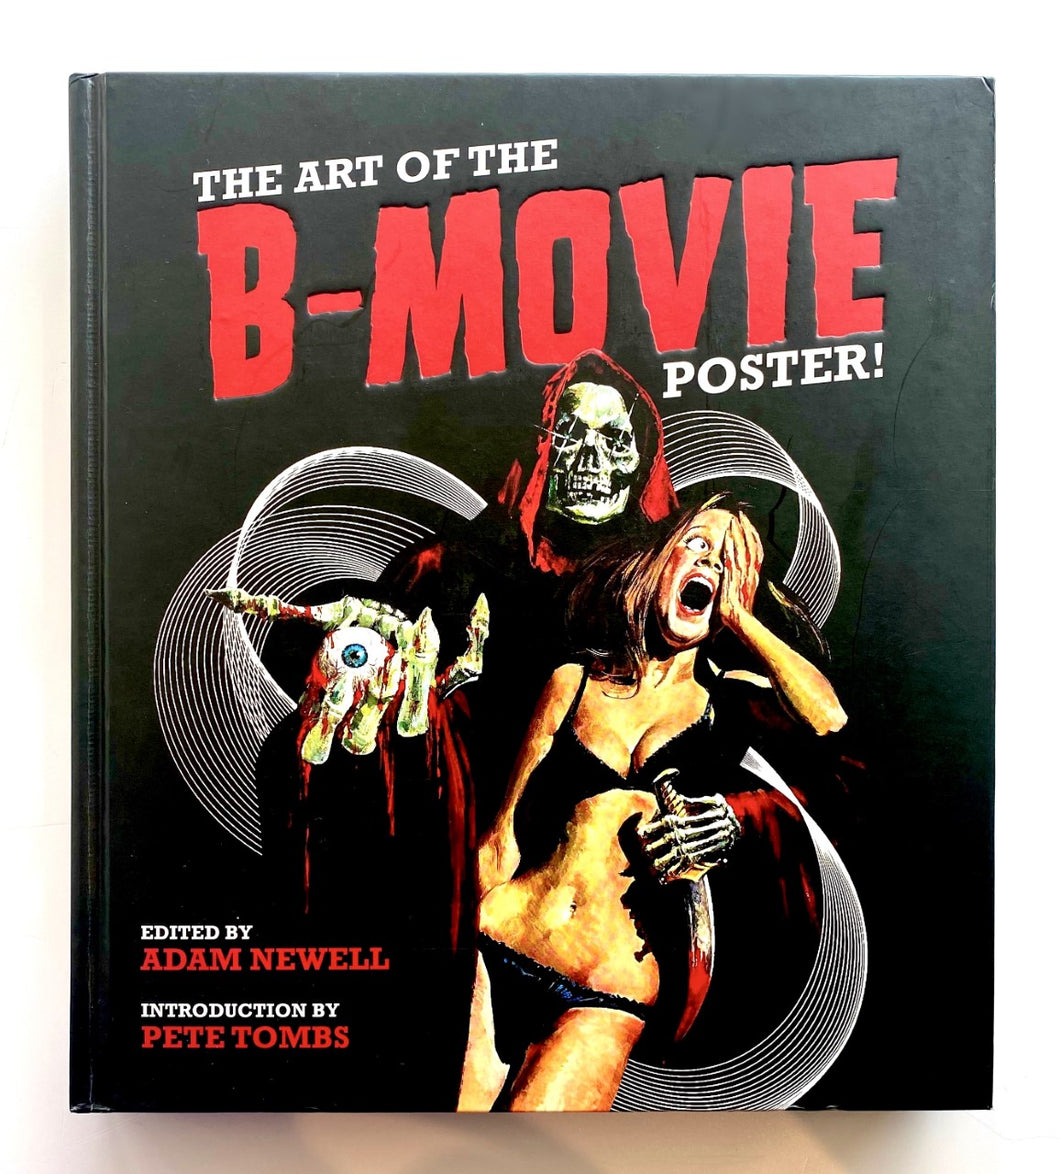 The Art of B-Movie Poster!